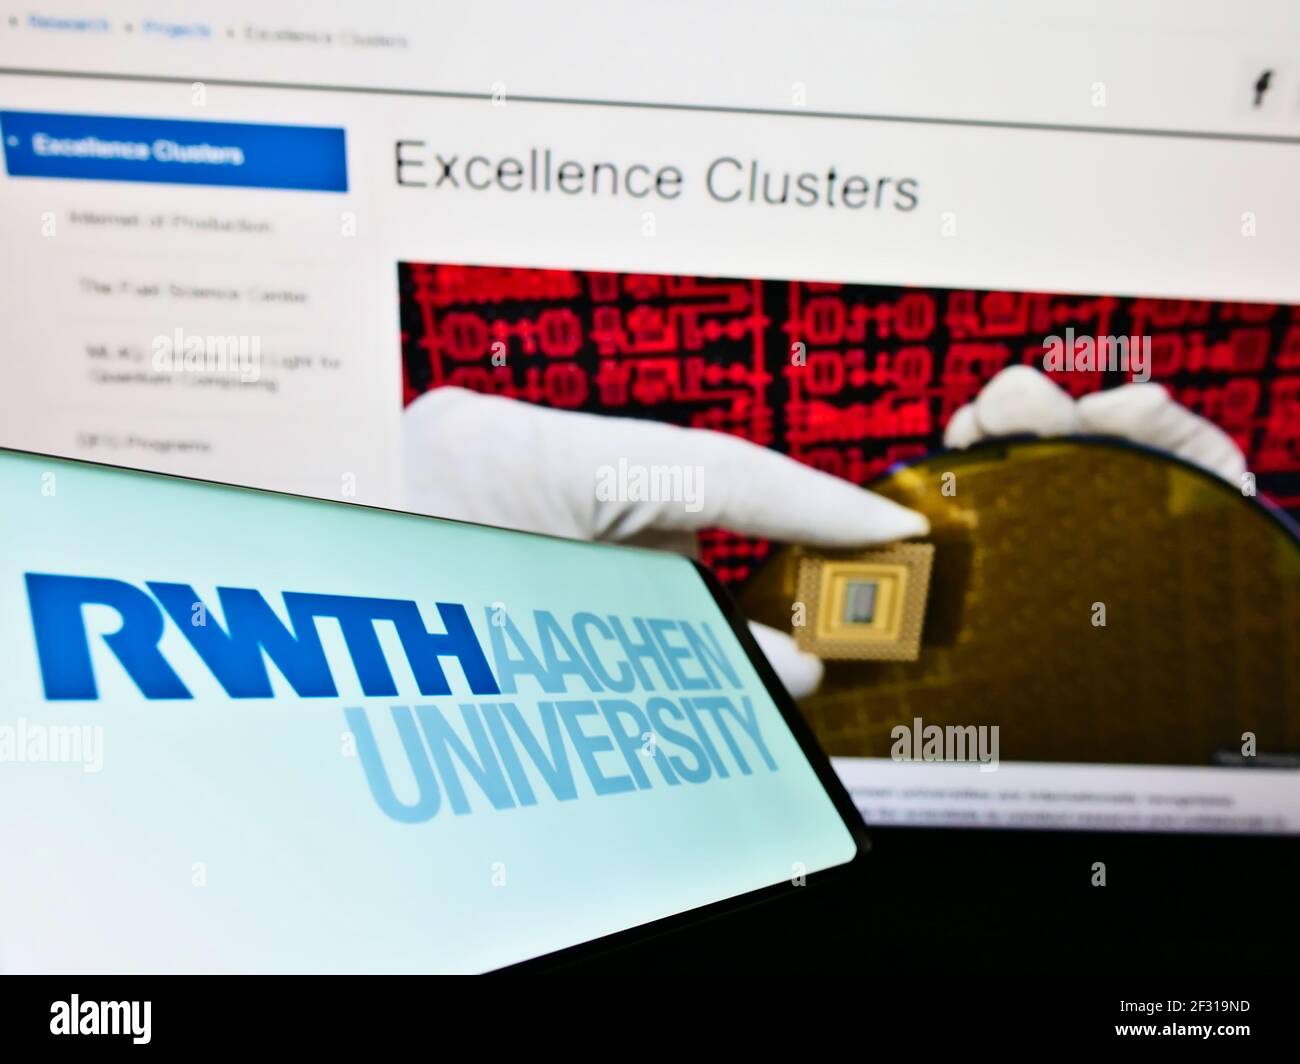 Mobile phone with logo of German education institution RWTH Aachen University on screen in front of website. Focus on center-right of phone display. Stock Photo